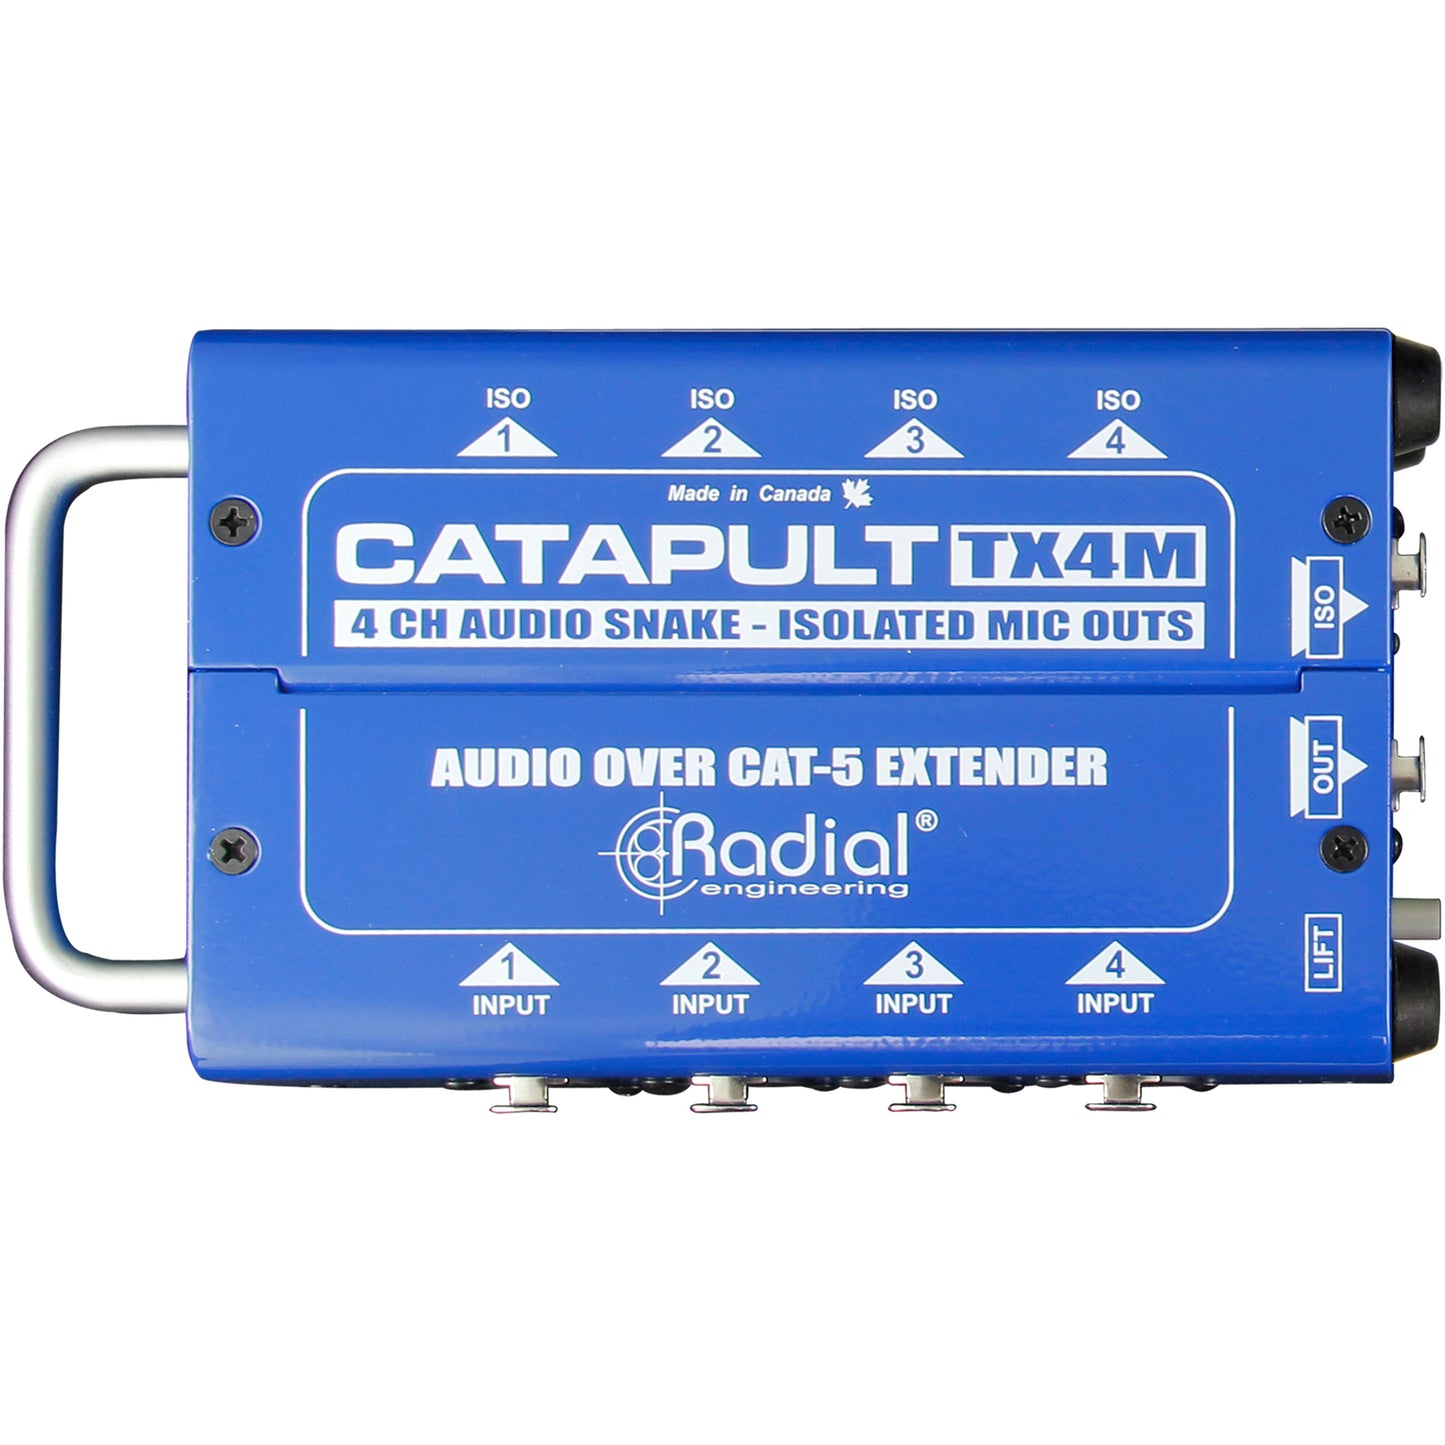 Radial%20Engineering%20Catapult%20TX4M%20Cat5%20Audio%20Receiver%20(4x4%20Mic%20In%2FOut)